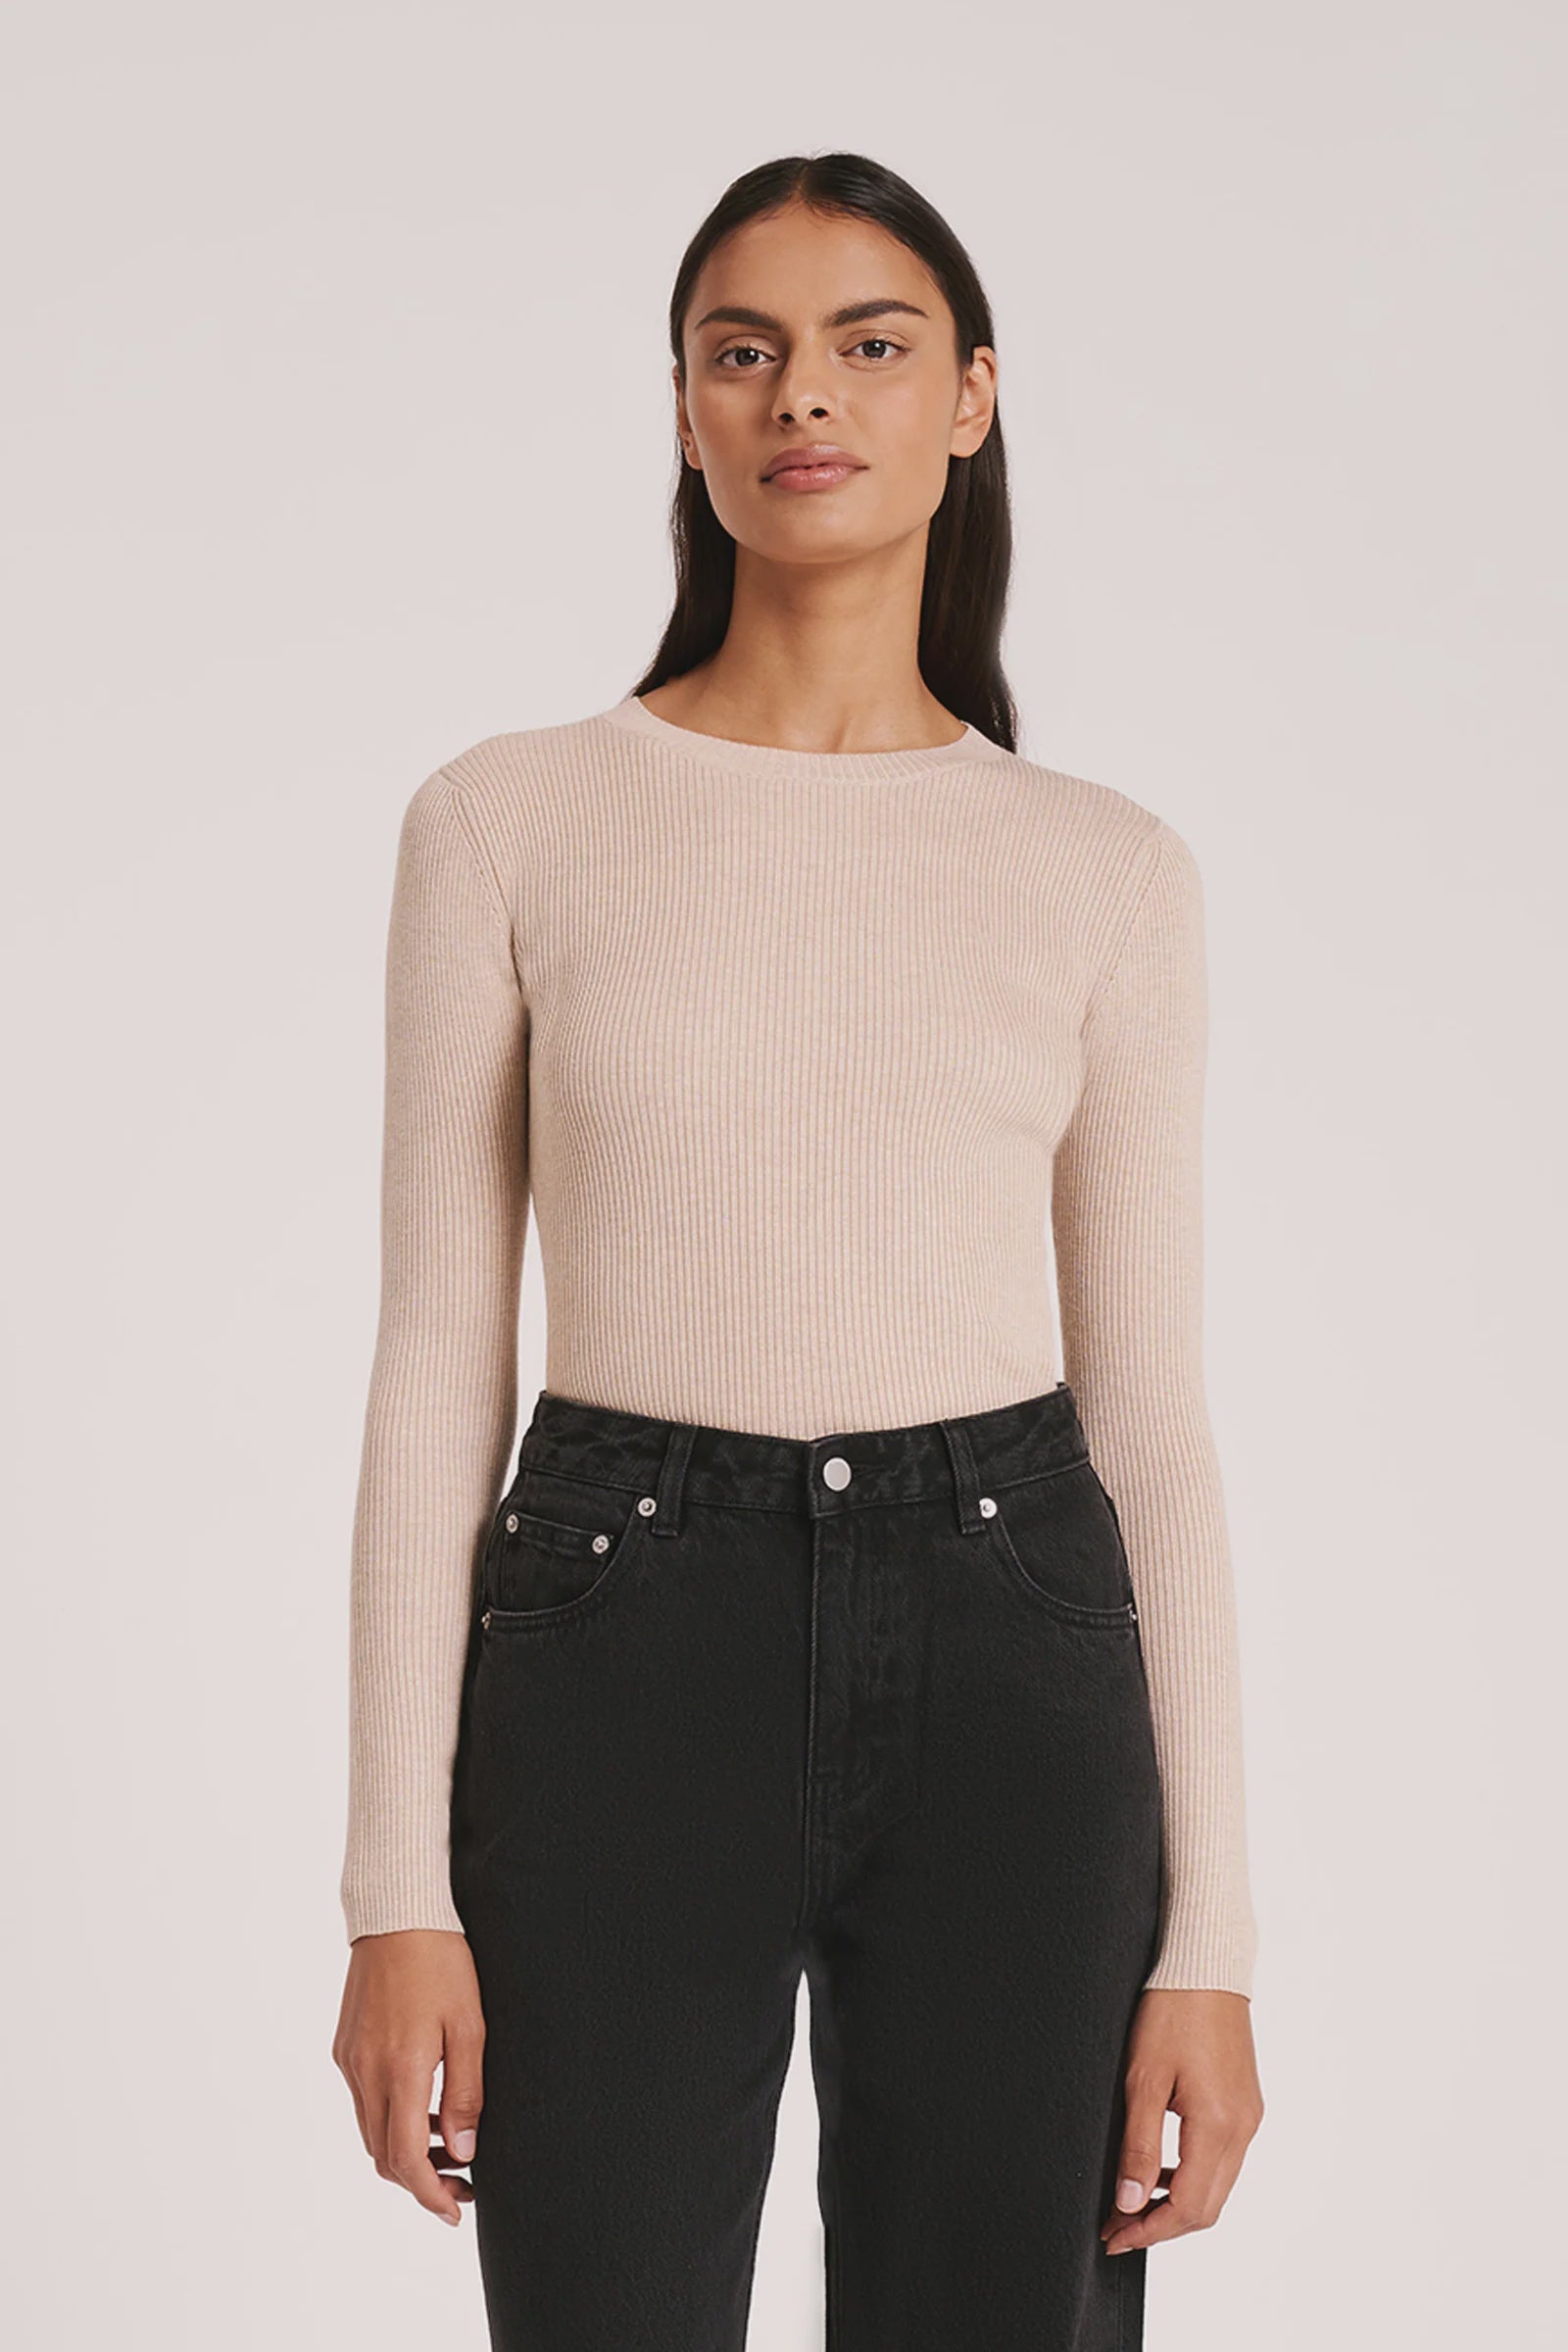 Nude Lucy | Classic LS Knit - Oatmeal